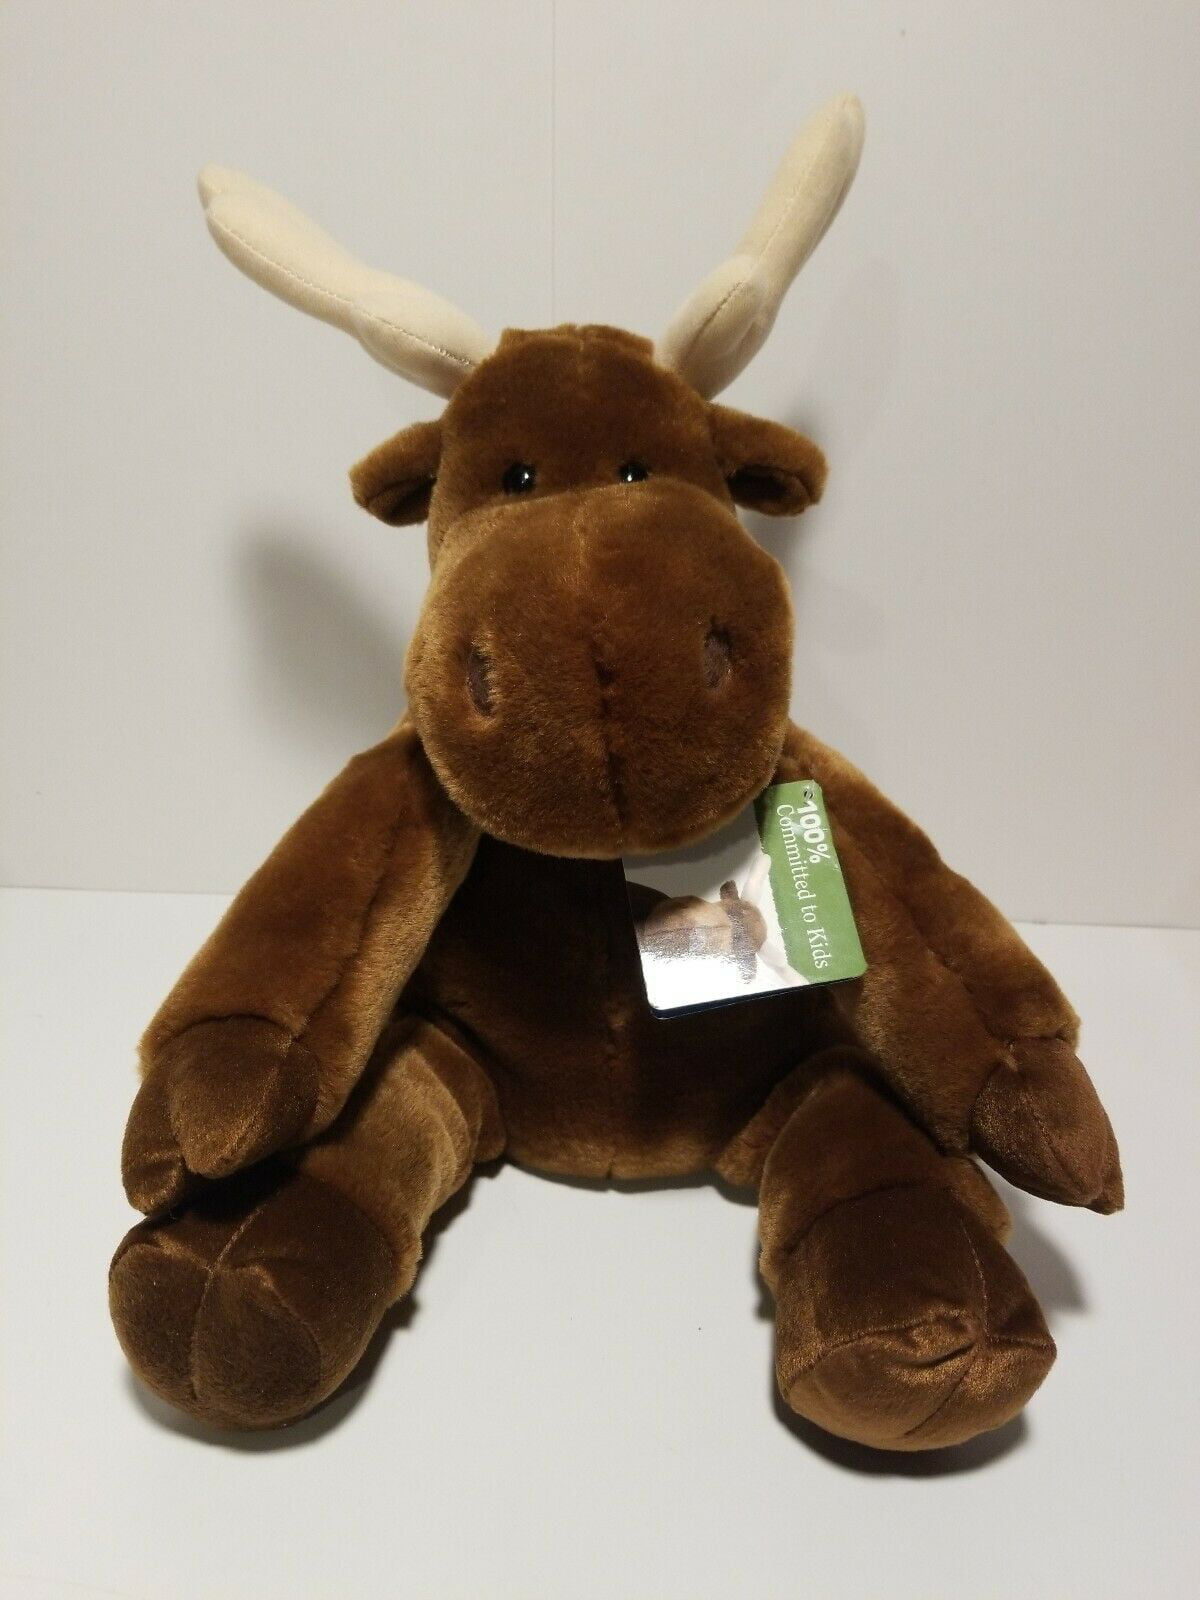 Kohls Cares 14" Brown Moose Plush If You Give A Moose A Muffin Stuffed Animal 